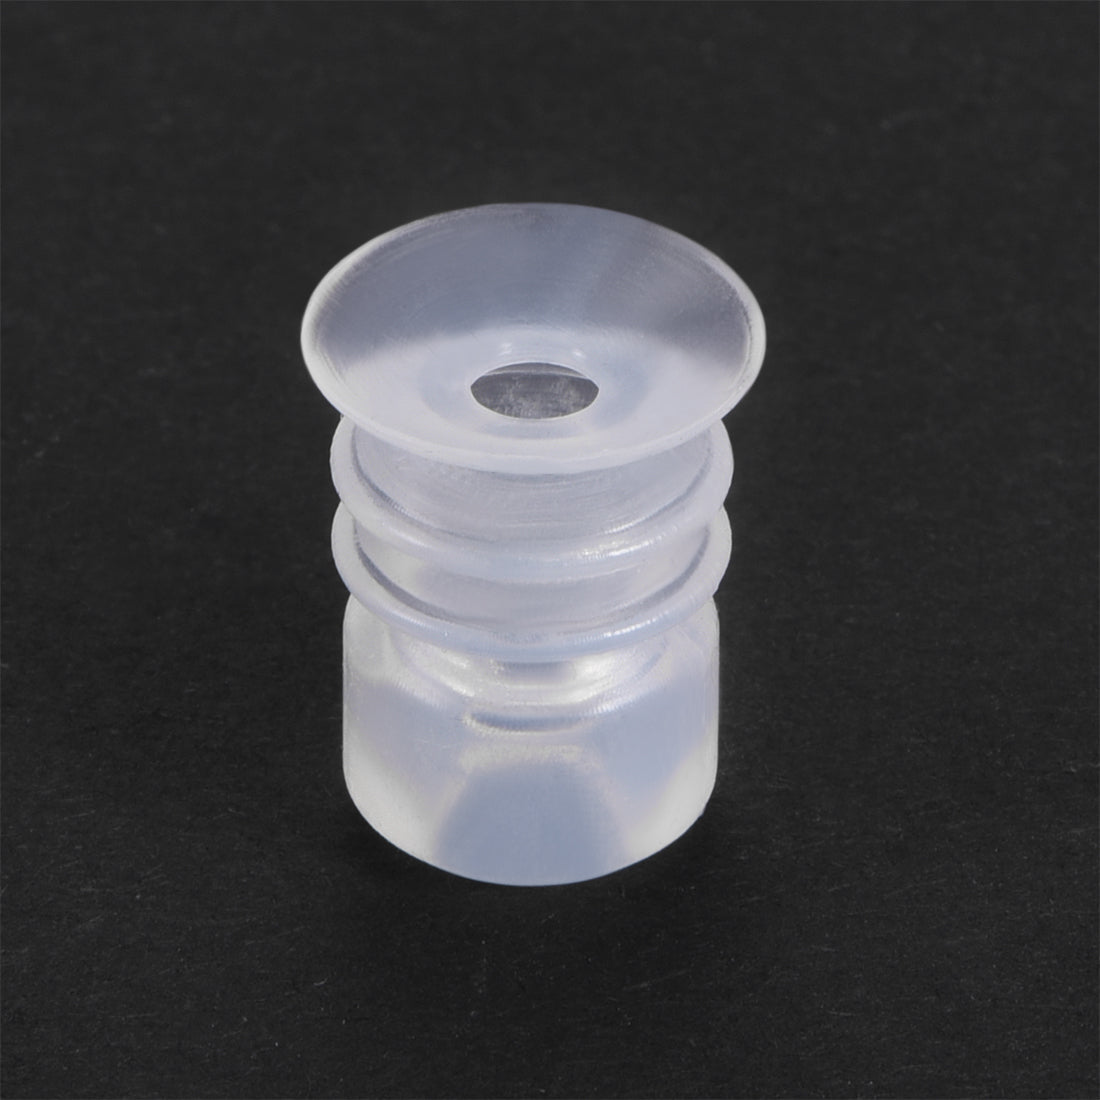 uxcell Uxcell Clear White Soft Silicone Waterproof Vacuum Suction Cup 12mmx5mm Bellows Suction Cup,4pcs